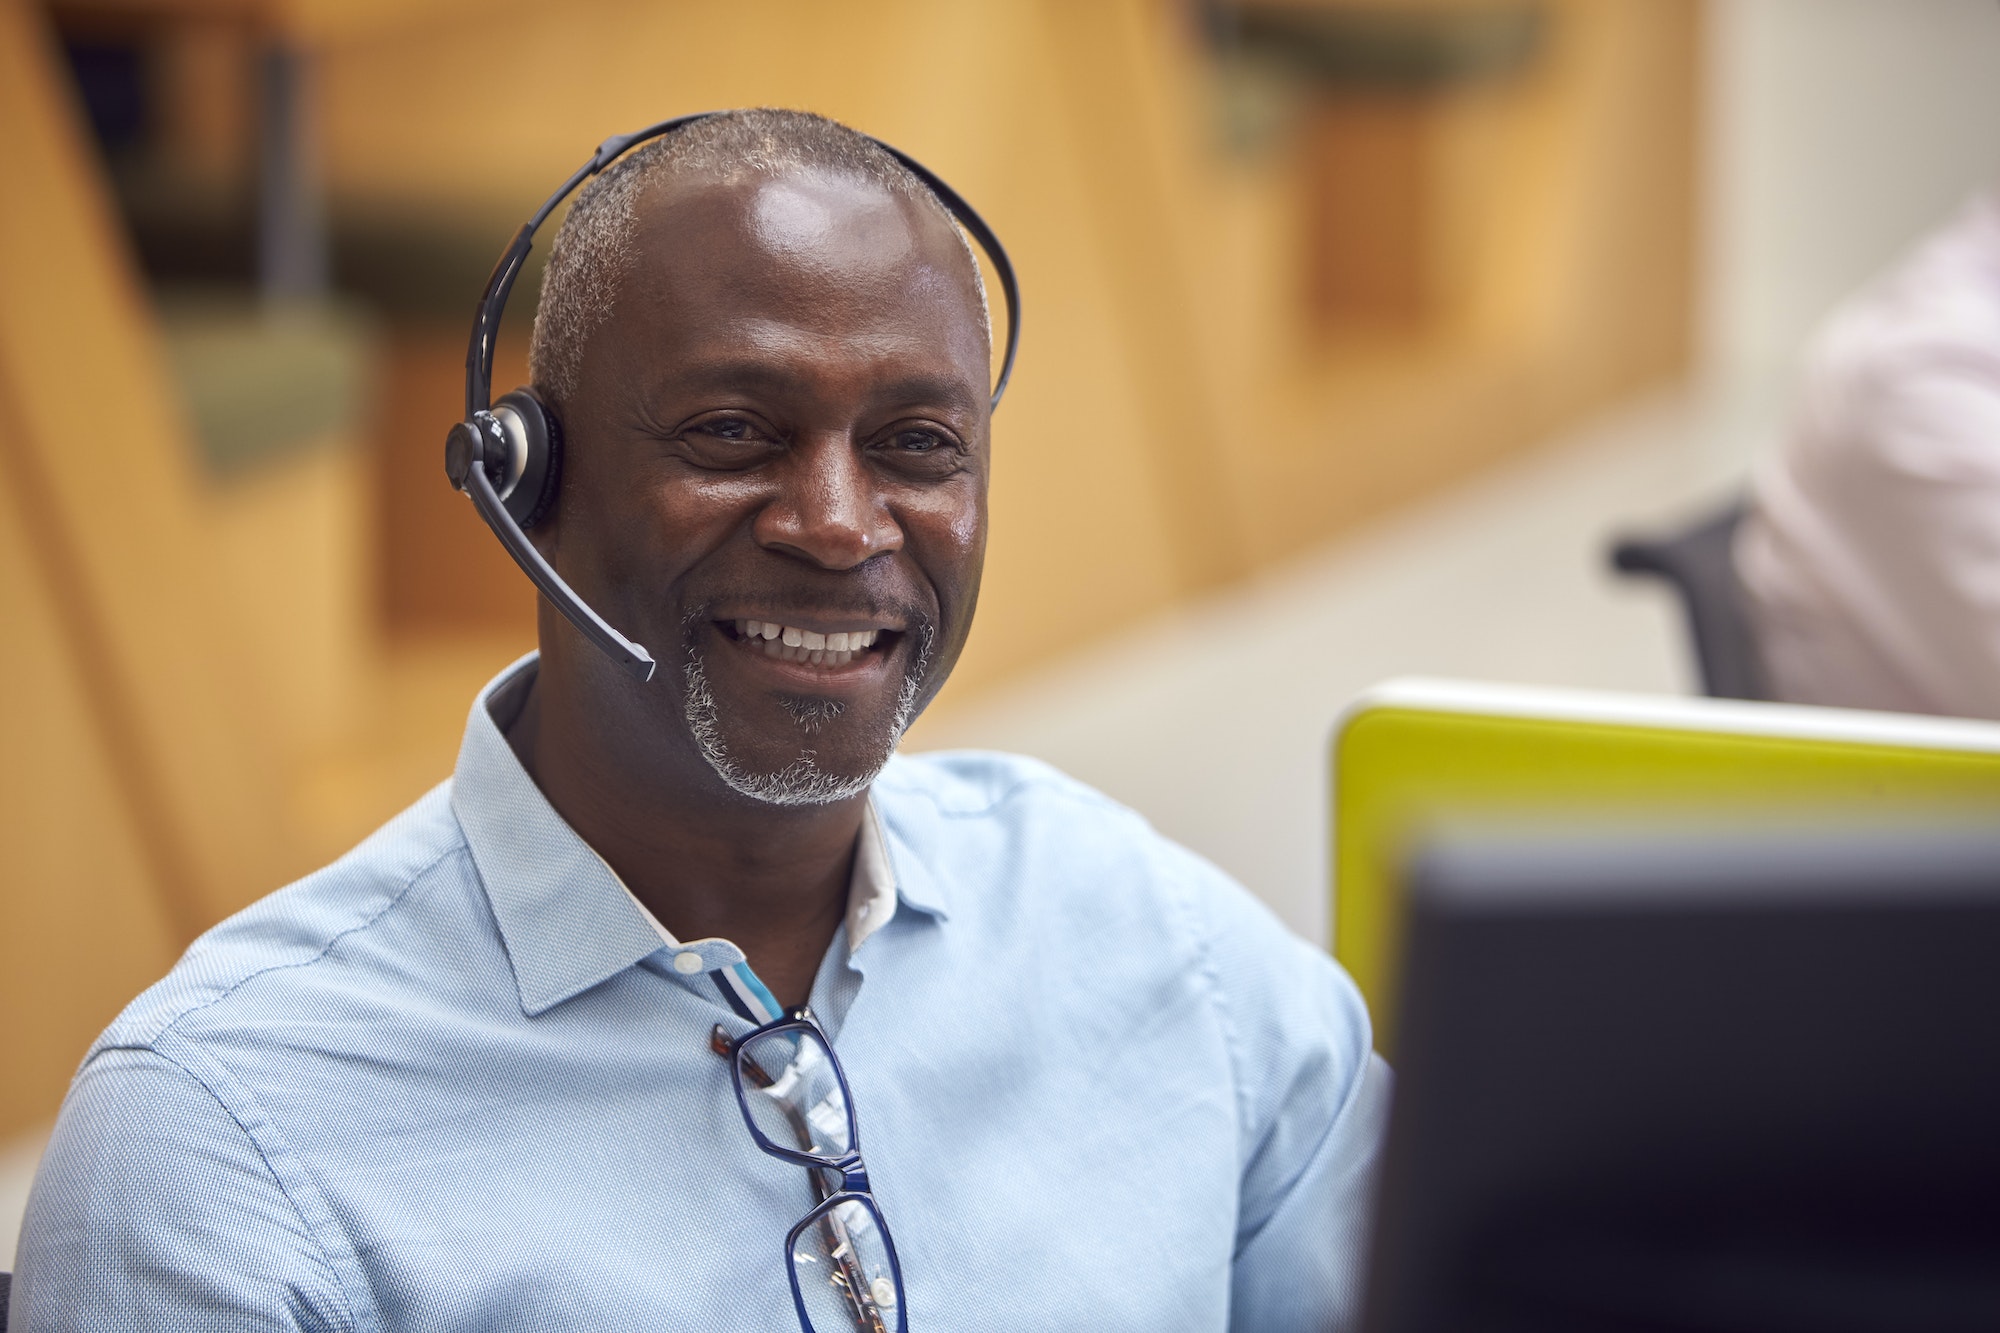 Portrait Of Mature Businessman Wearing Phone Headset Talking To Caller In Customer Services Centre